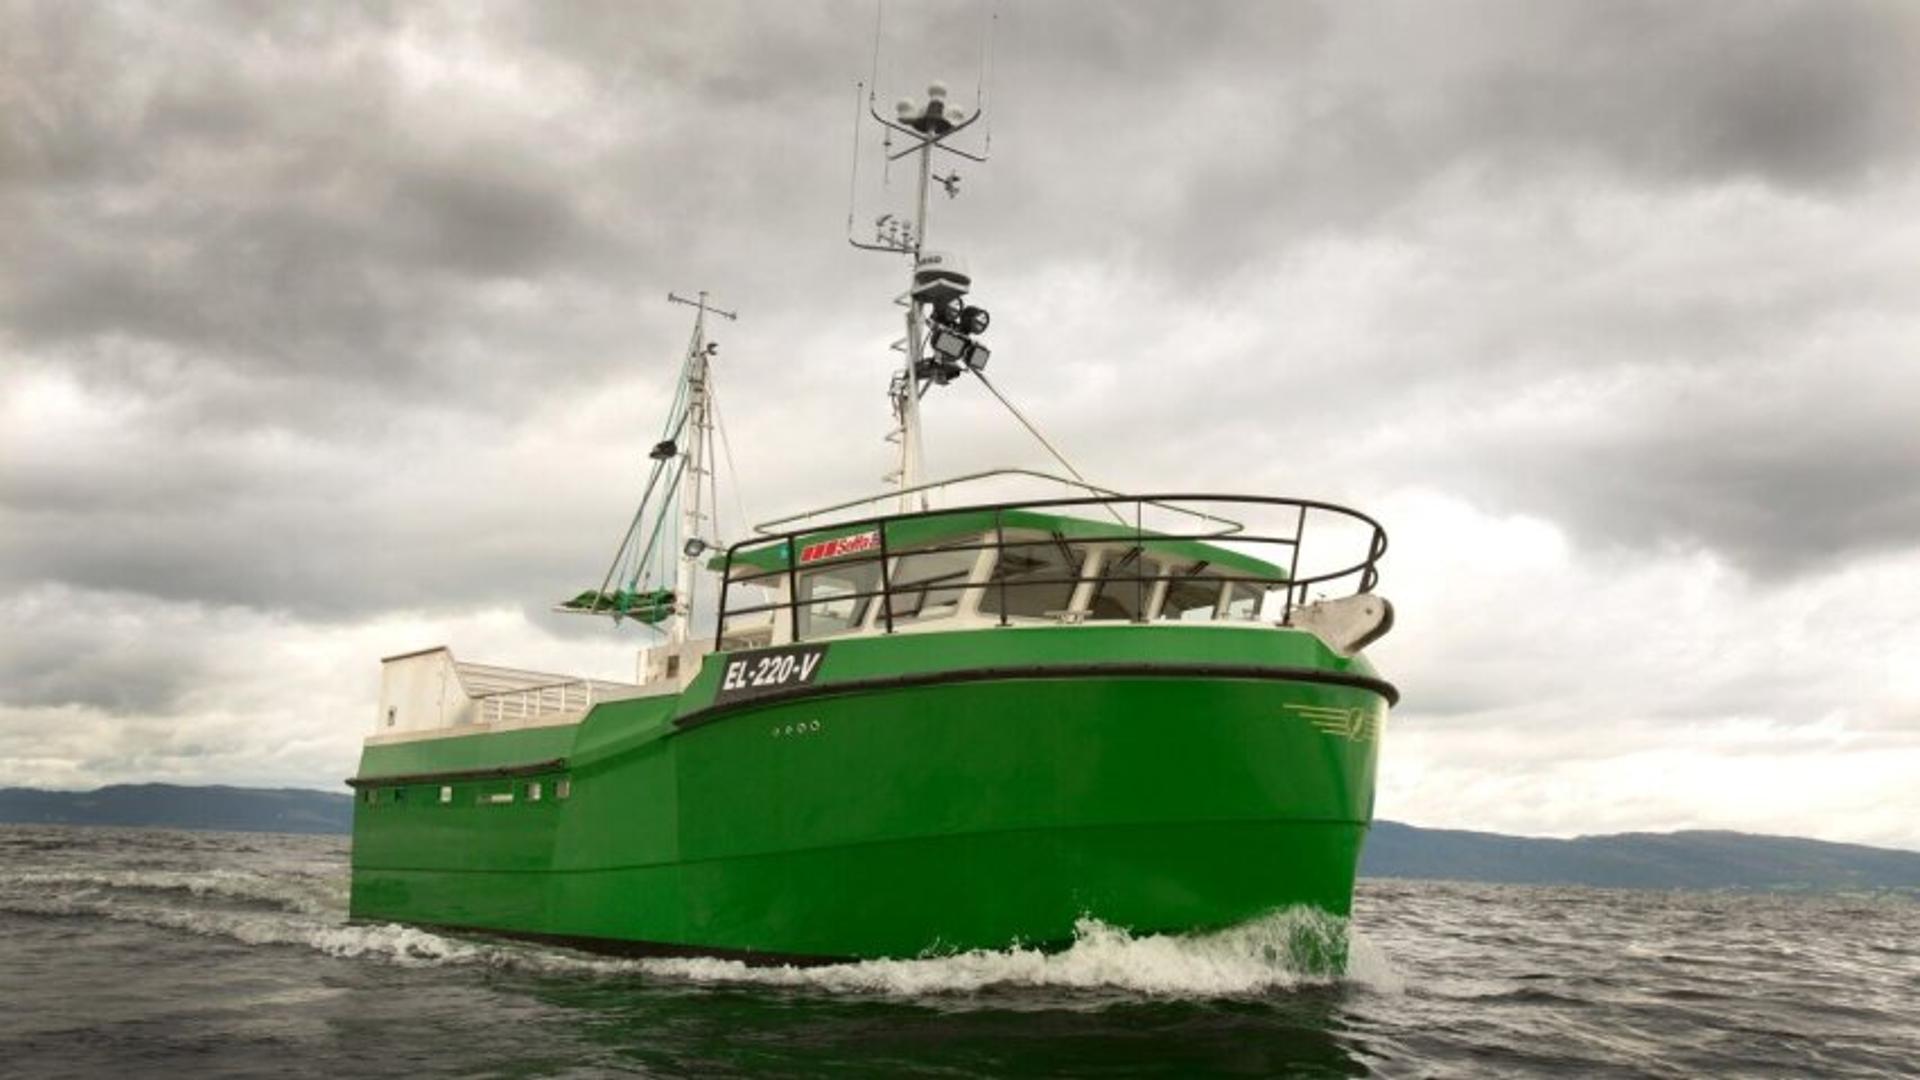 Selfa Arctic has delivered the world's first hybrid fishing boat